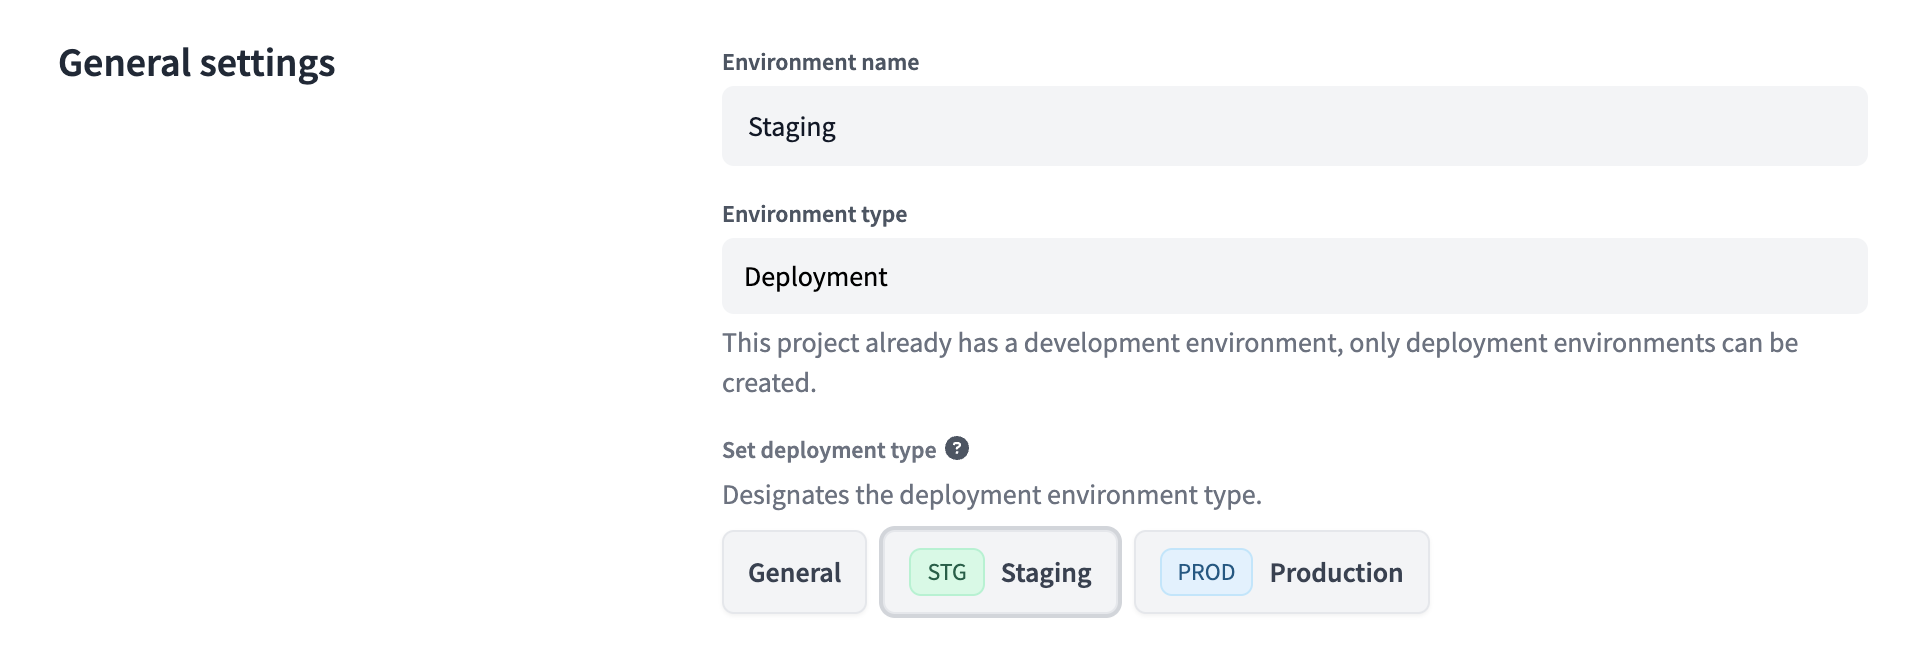 Setting an environment to staging type.